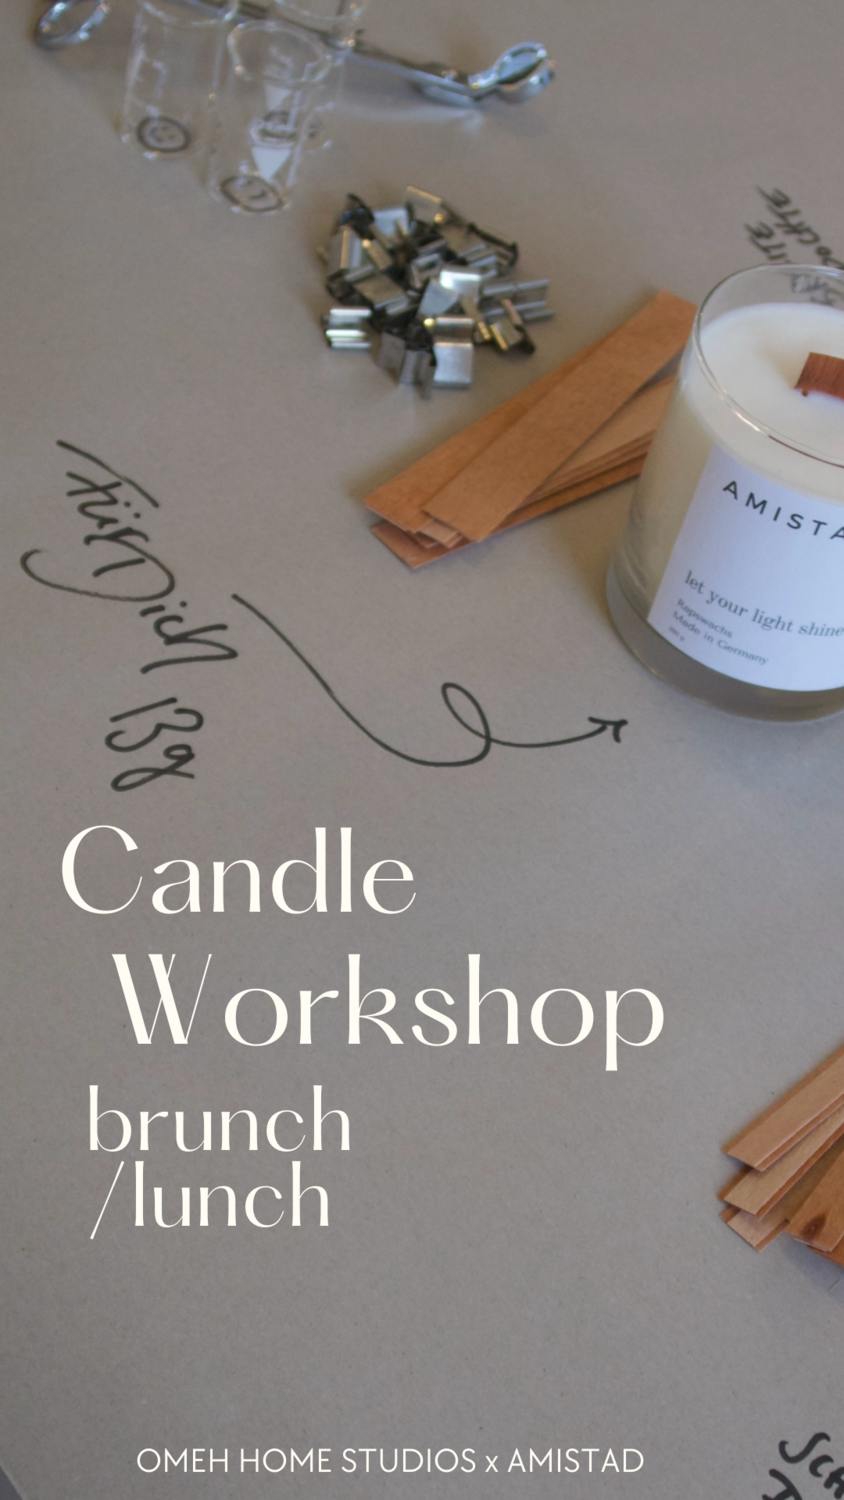 Candle Workshop with Brunch 02.04